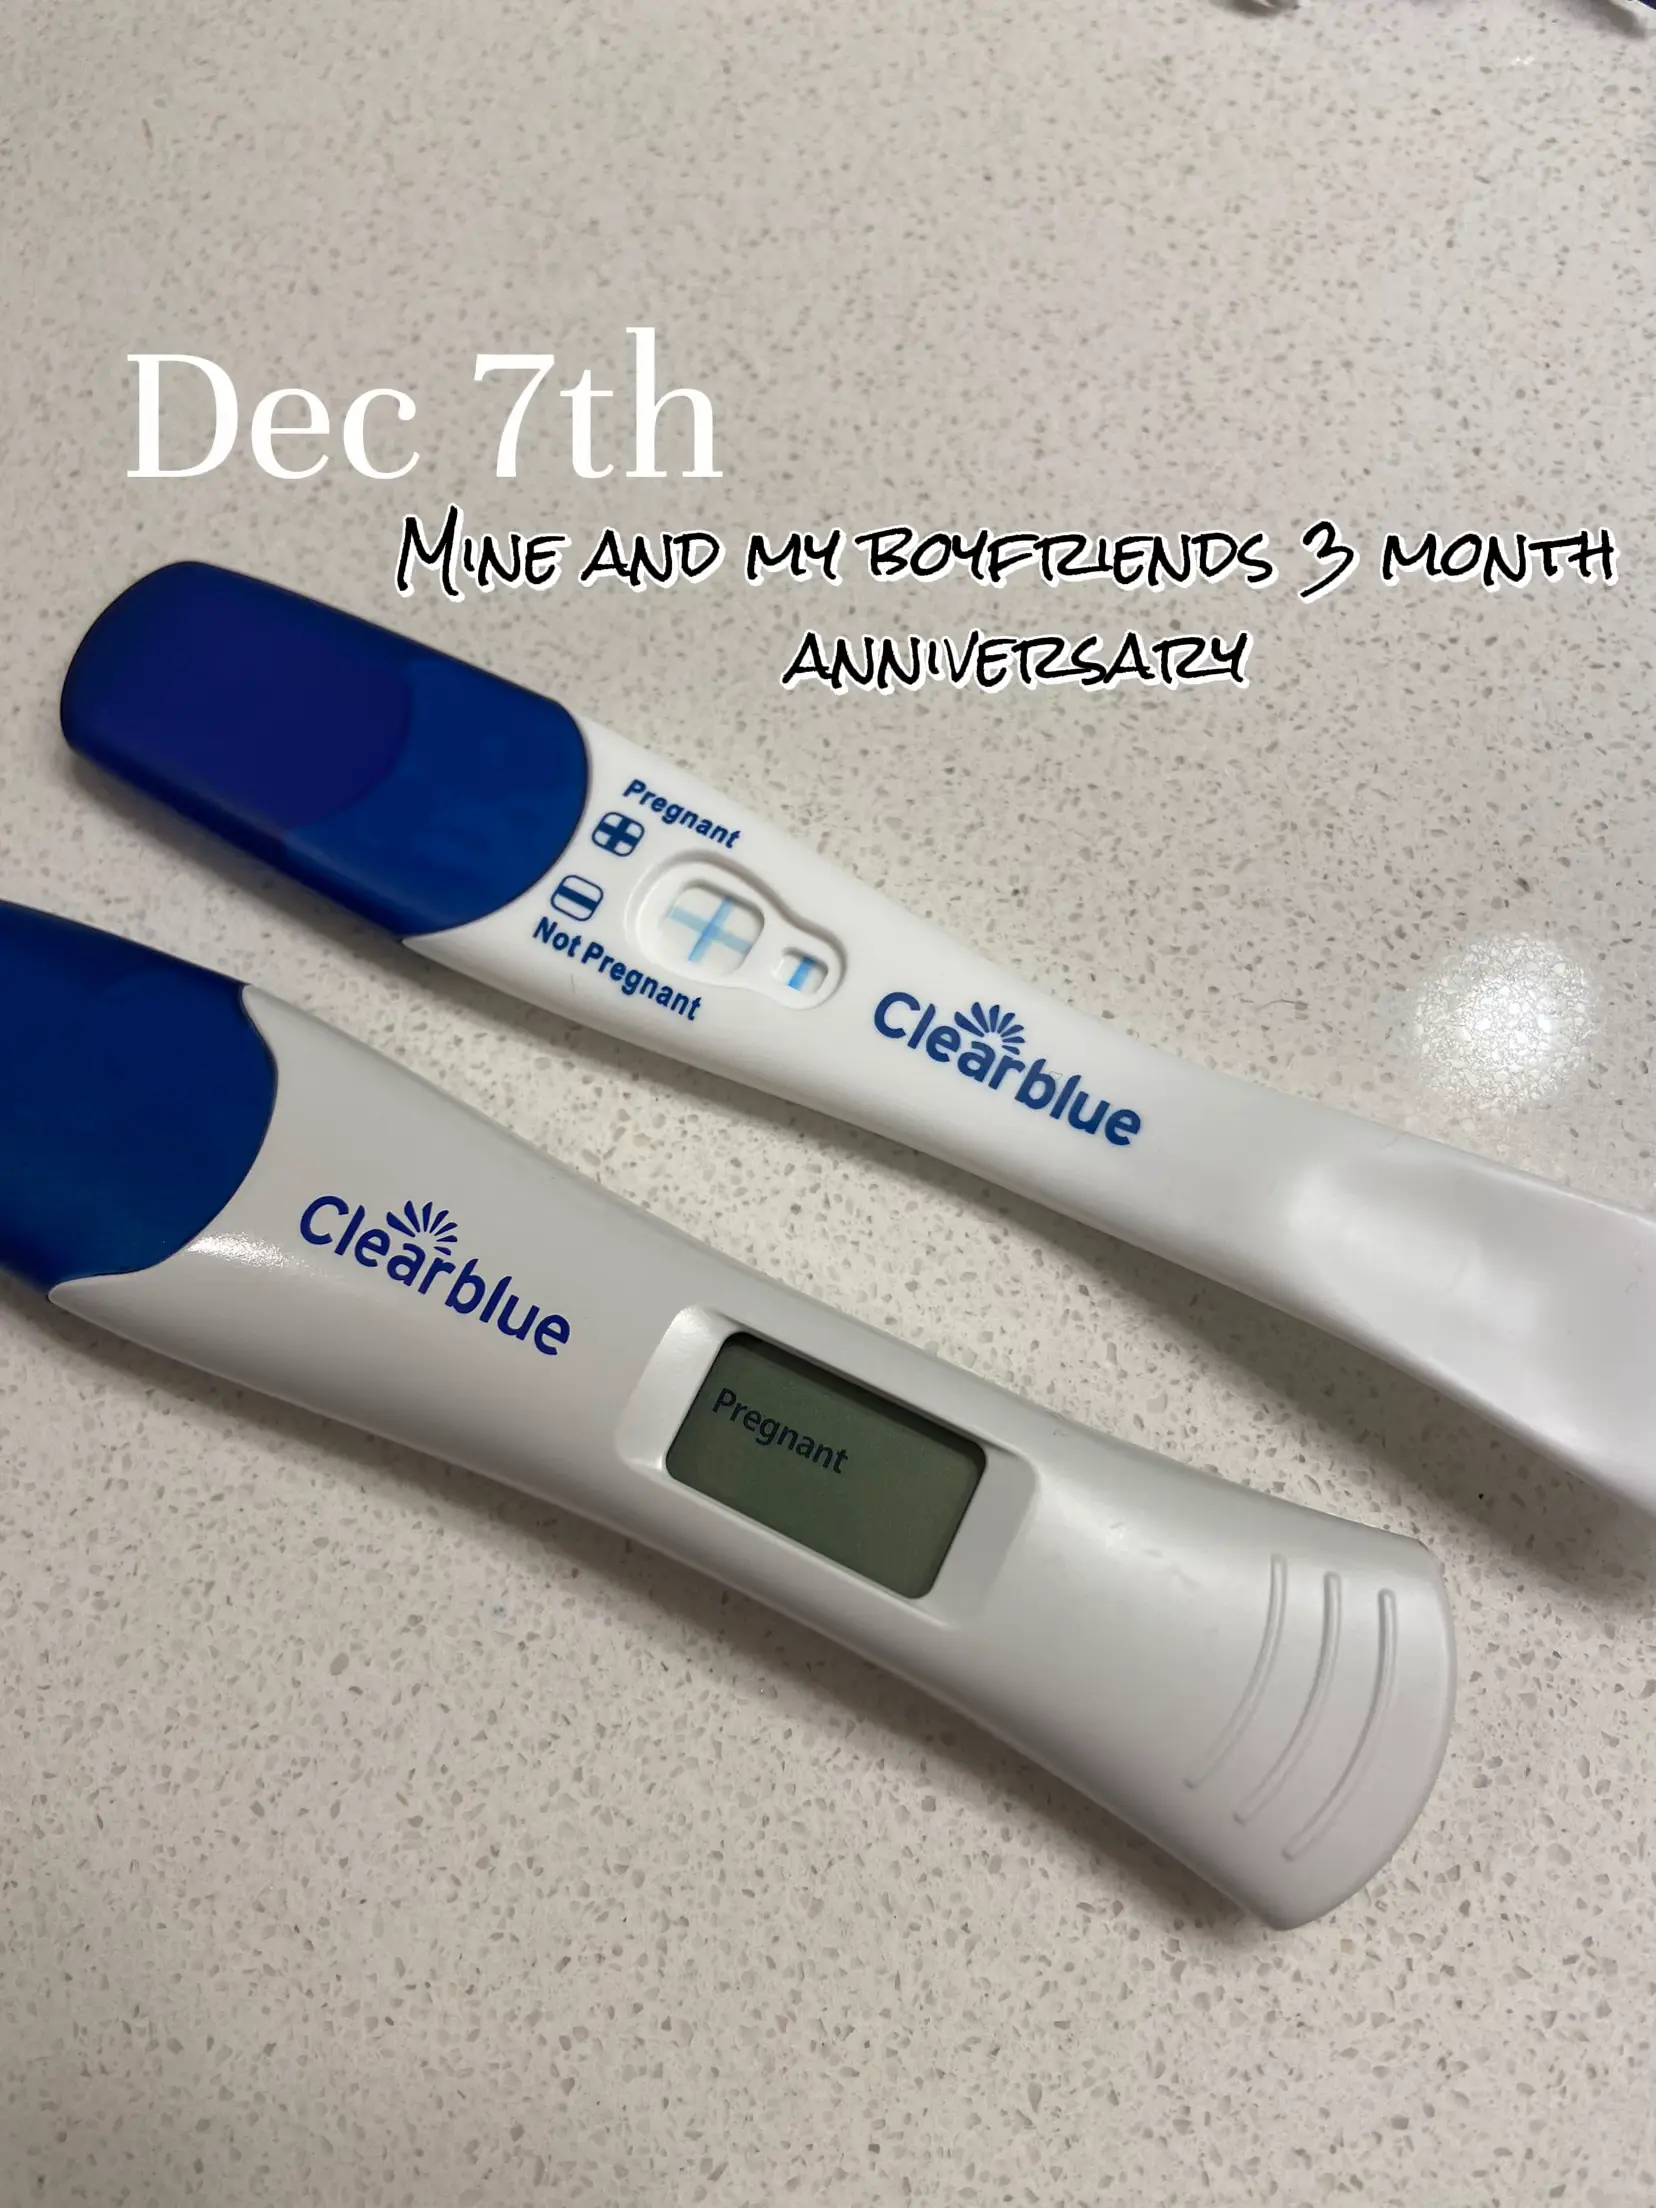 OTC Clearblue Pregnancy Test Weeks Indicator – Pure Integrative